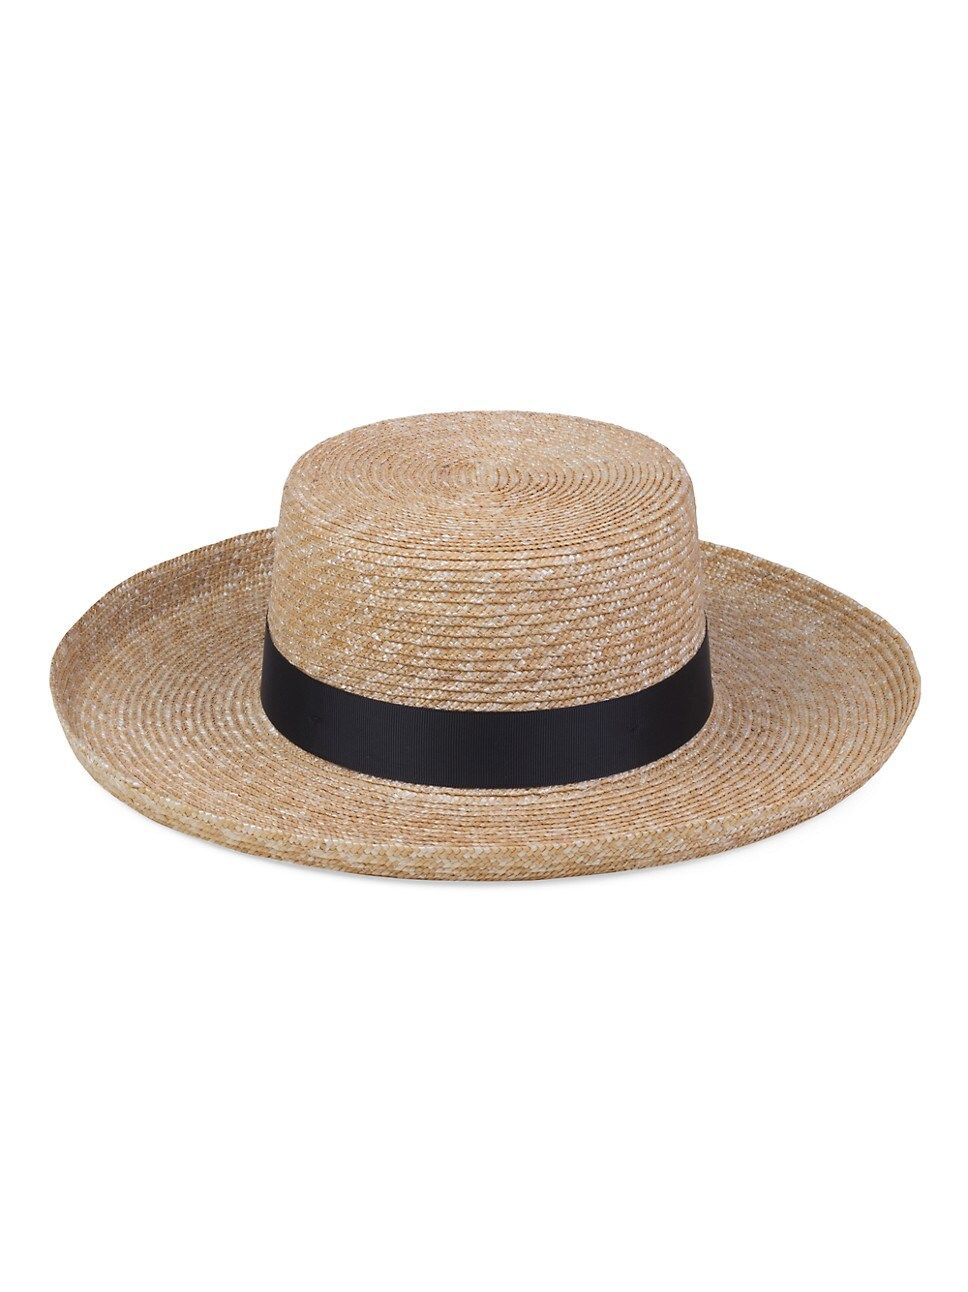 The Violette Straw Boater Hat | Saks Fifth Avenue